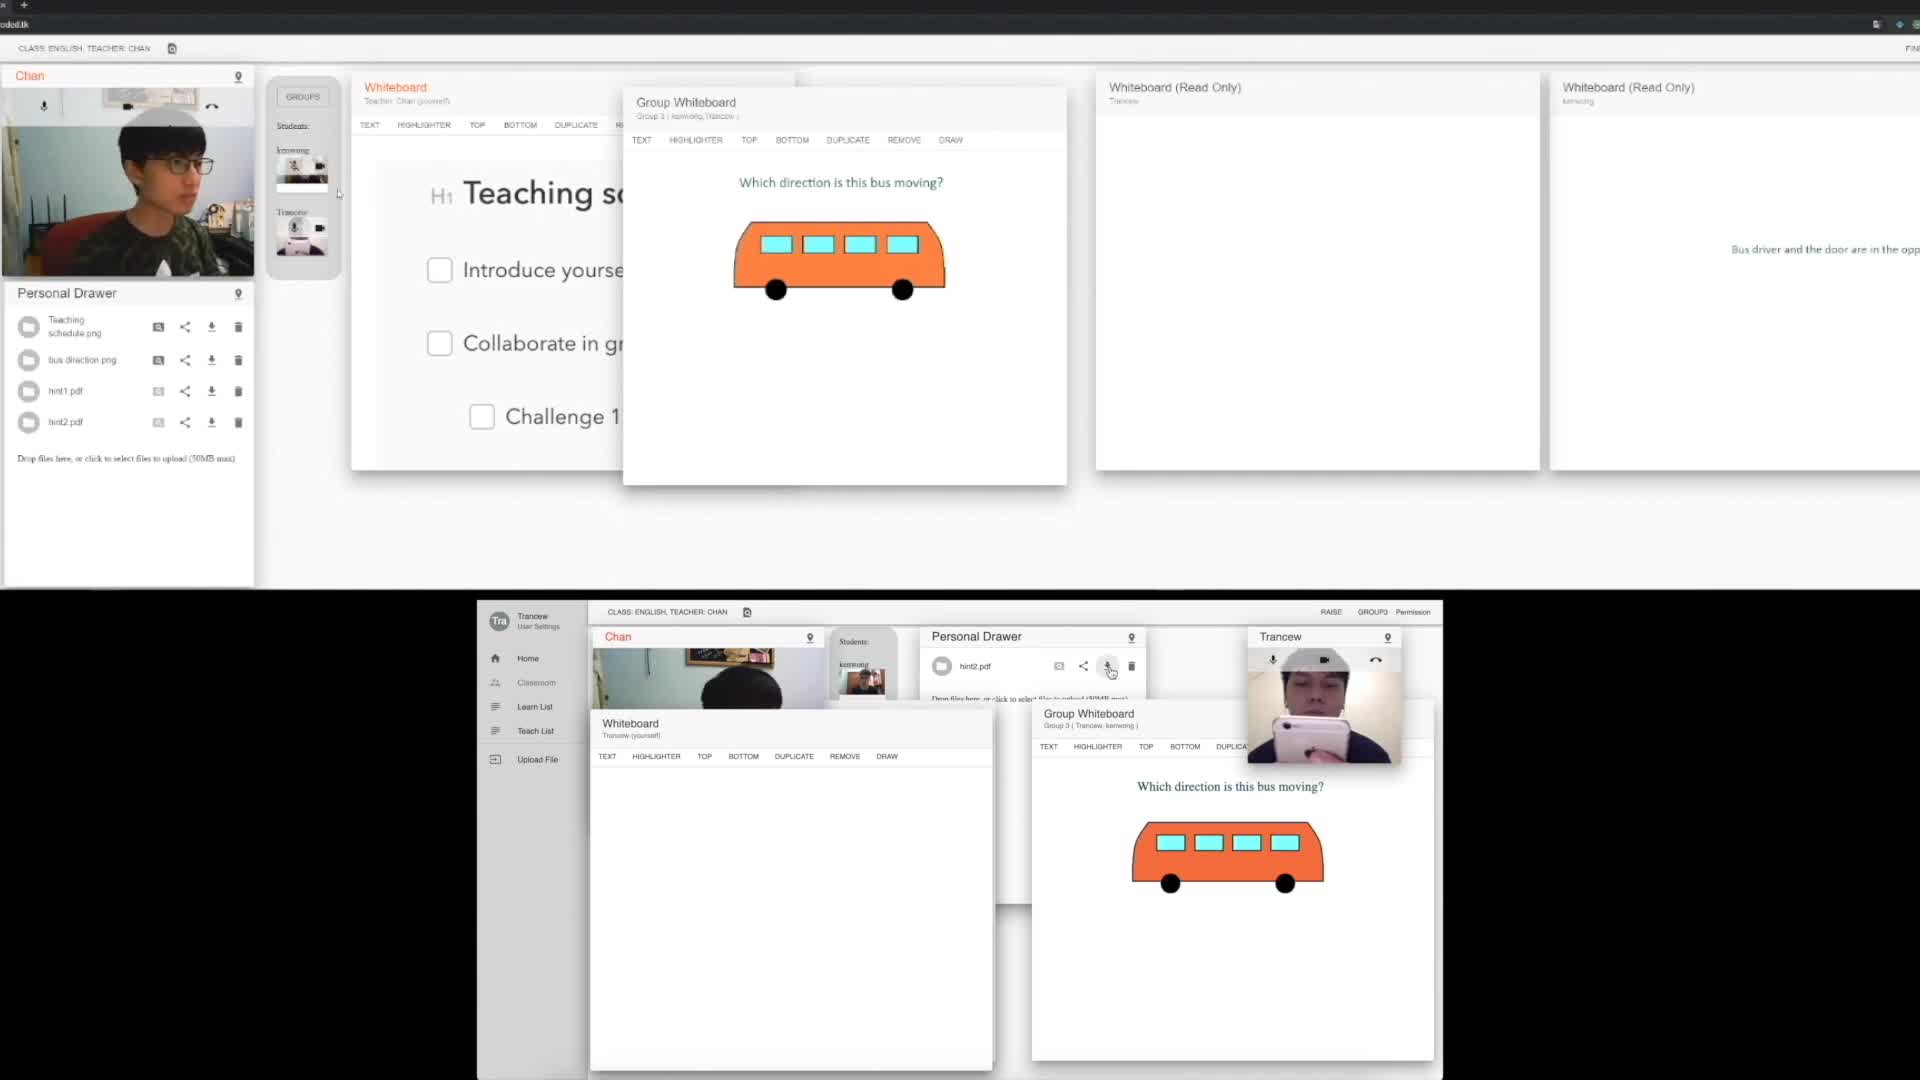 An integrated and realistic online classroom